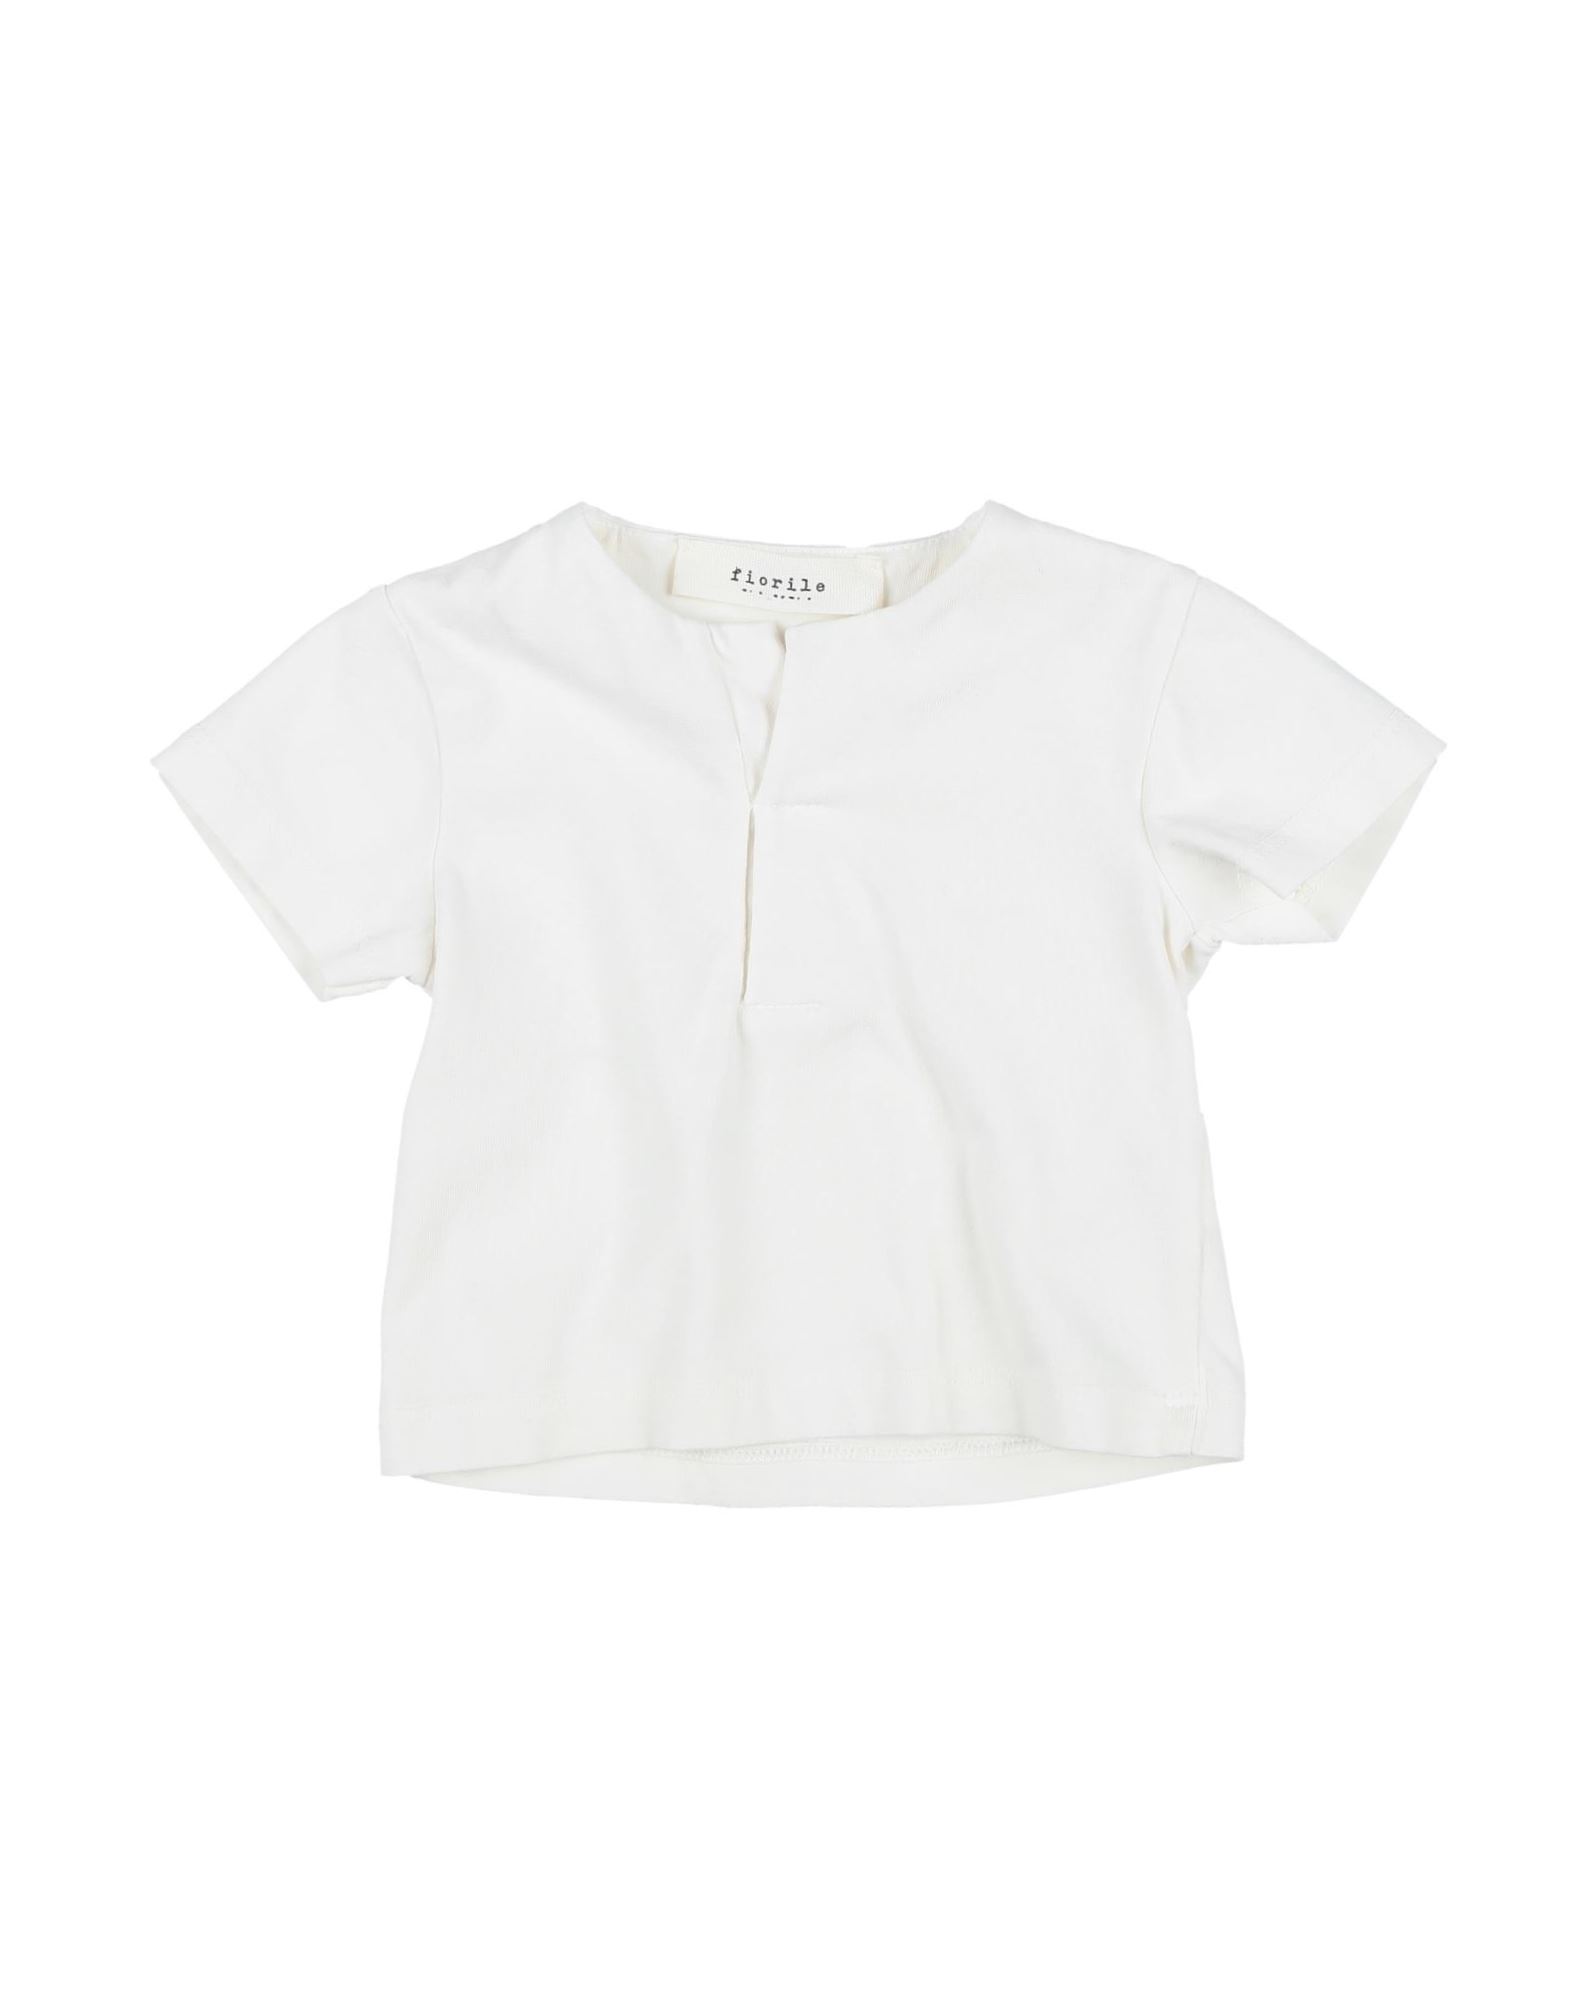 Fiorile Kids'  T-shirts In White